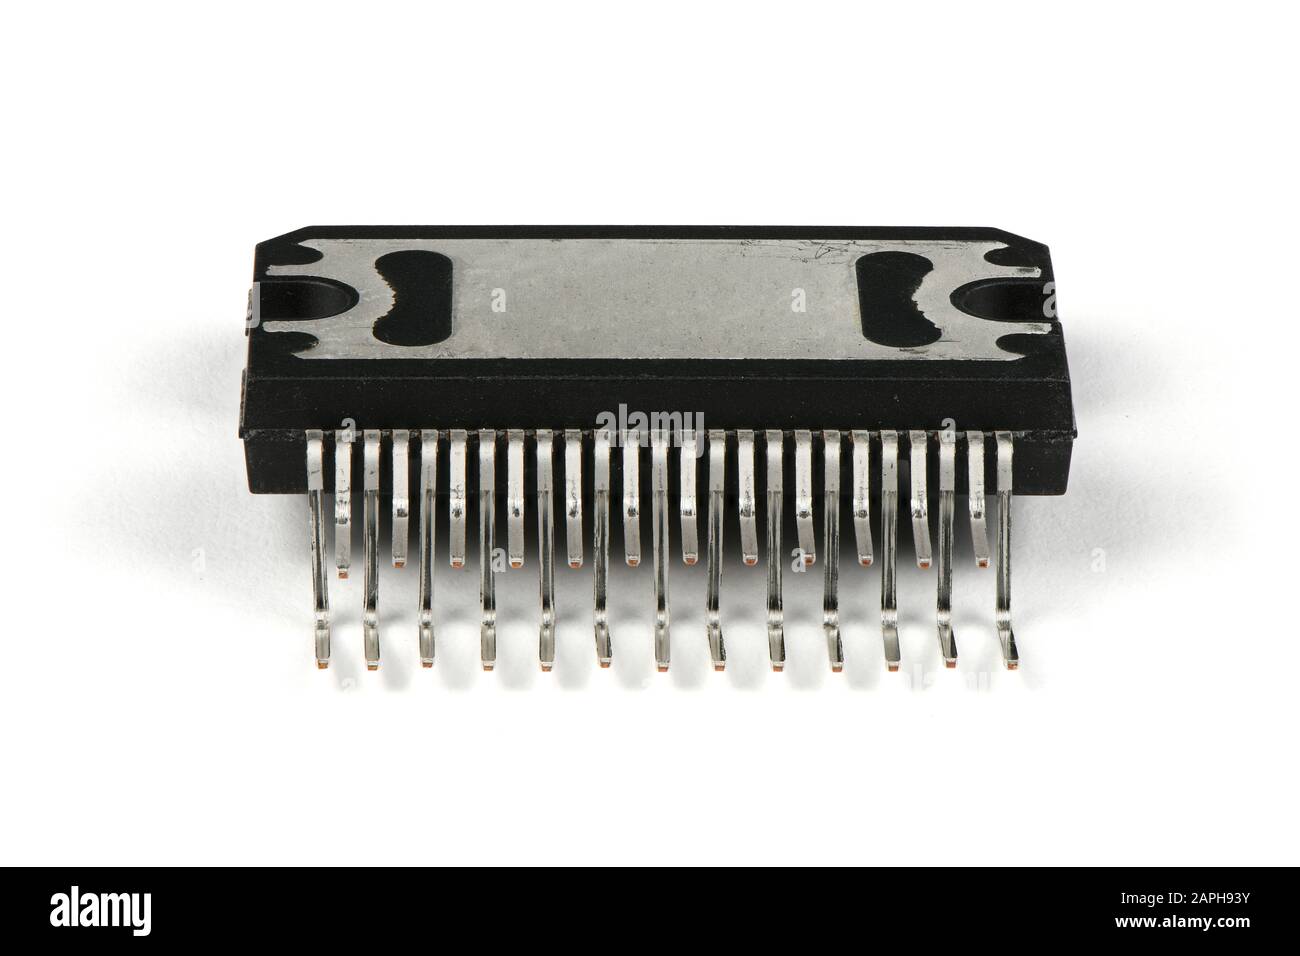 New microchip low frequency amplifier ULF isolated on a white background. High resolution photo. Full depth of field. Stock Photo